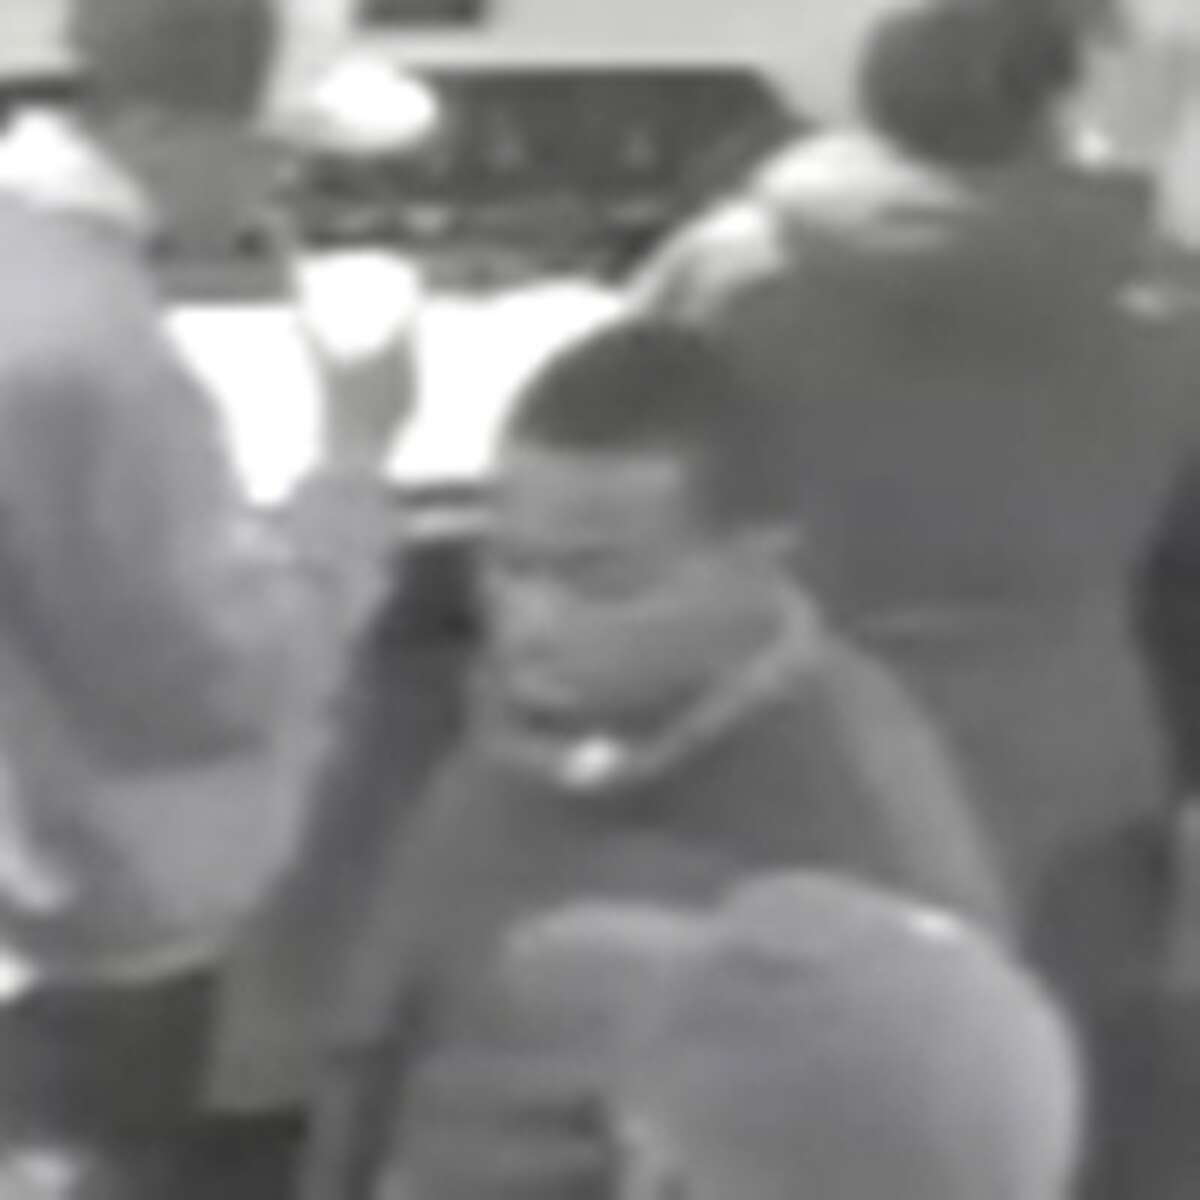 Shooting suspect appears in this surveillance video snapshot. (Courtesy of Colonie Police)